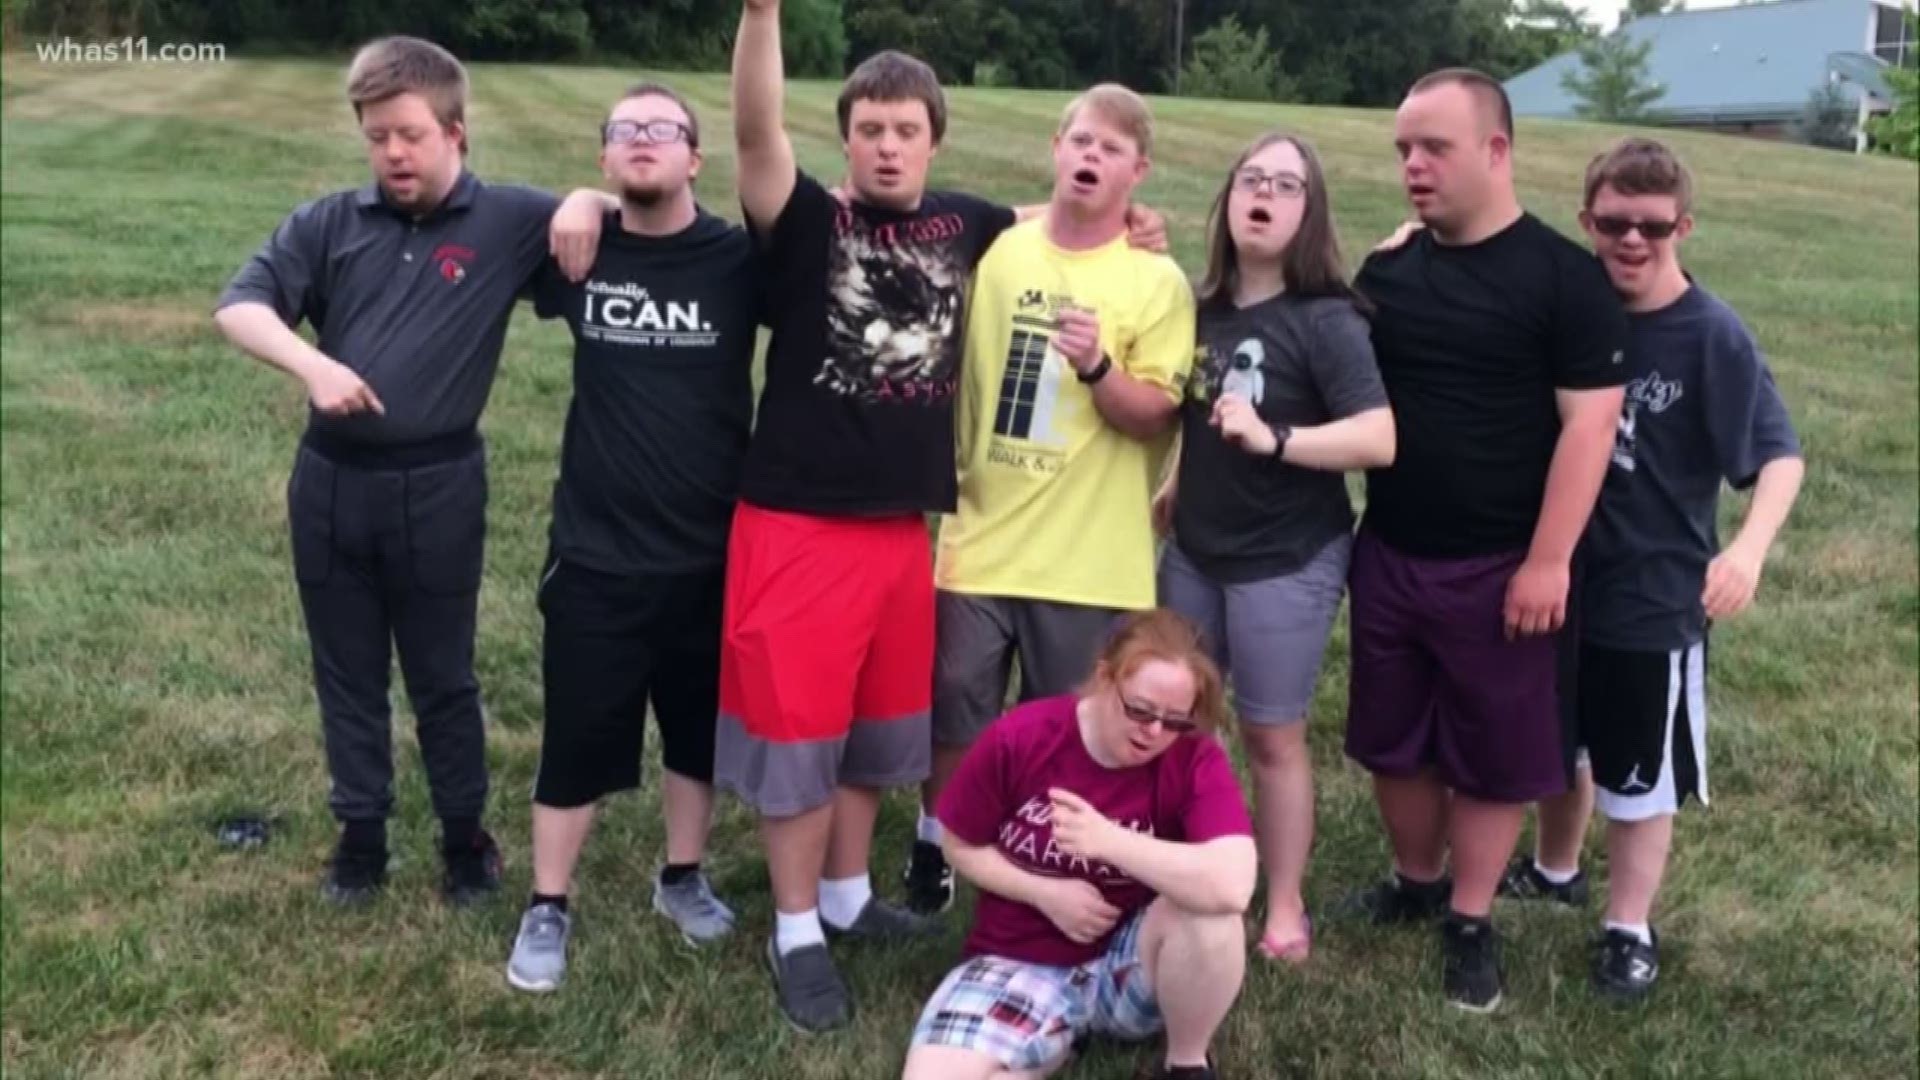 Down Syndrome of Louisville group members made a tribute video to the band, who will be in Louisville this weekend.